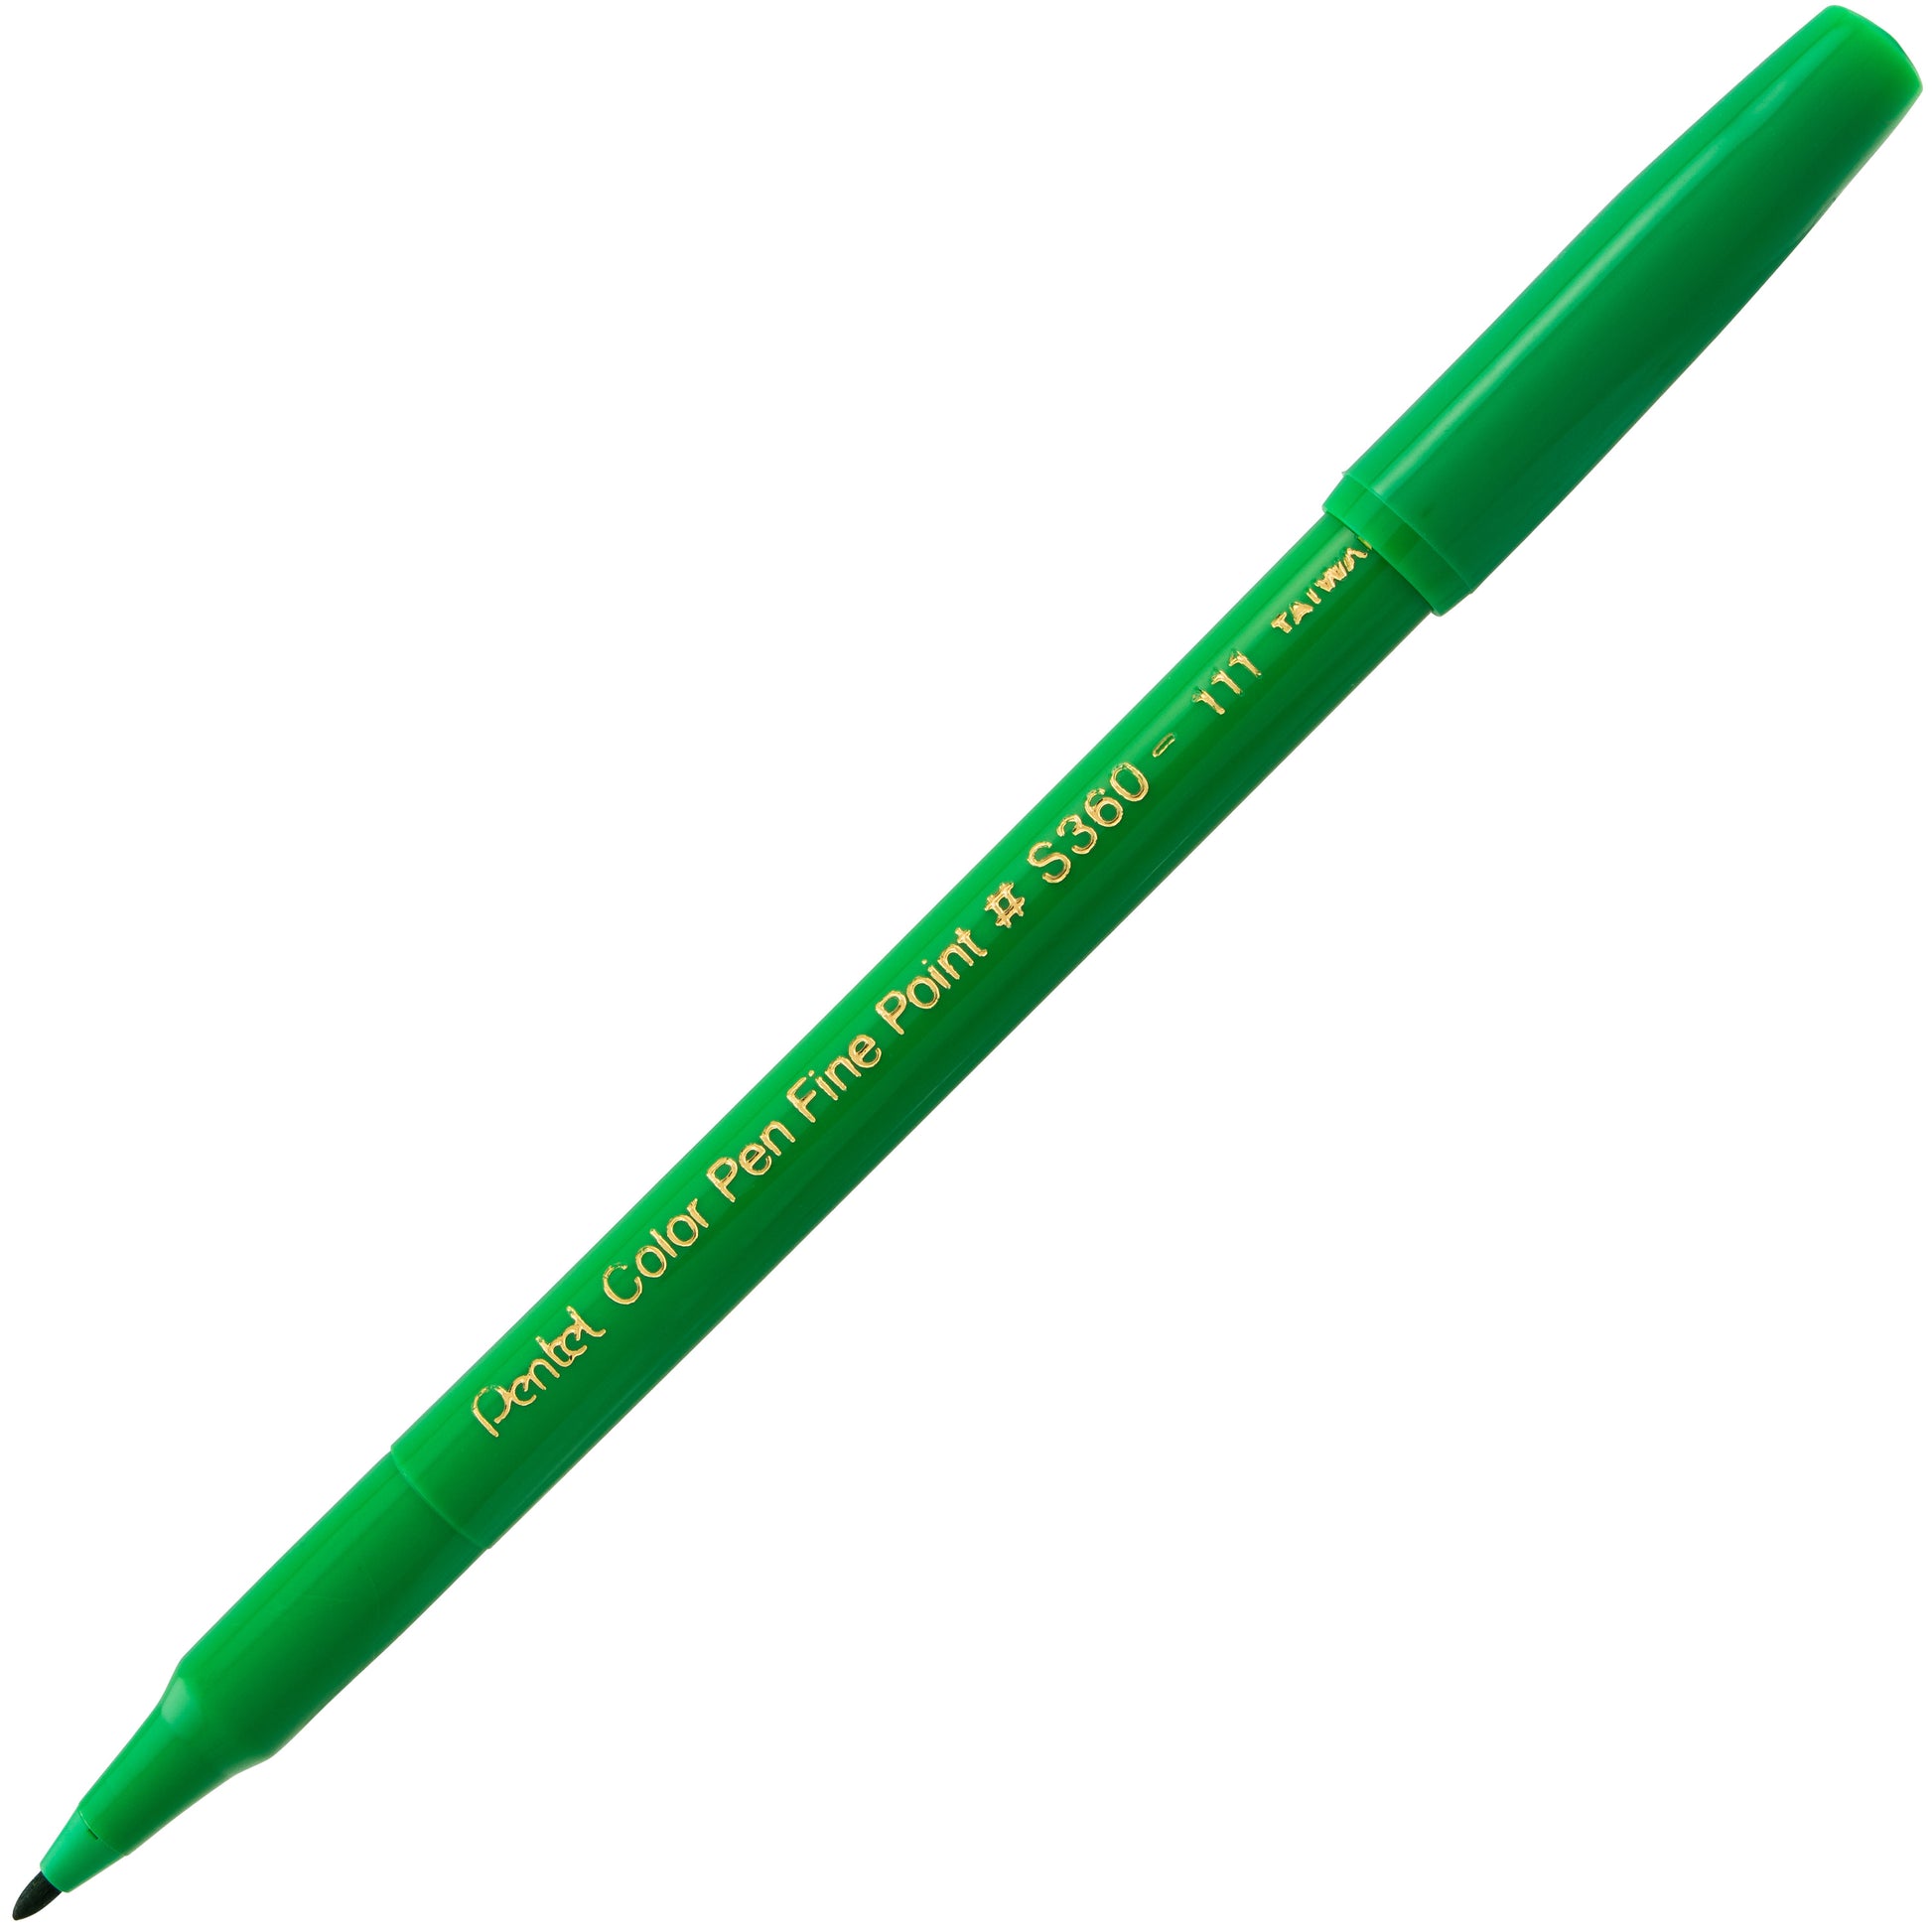  edding 1200 colour pen fine - green - 10 pens - round tip 1 mm  - felt-tip pen for drawing and writing - for school or mandala : Office  Products